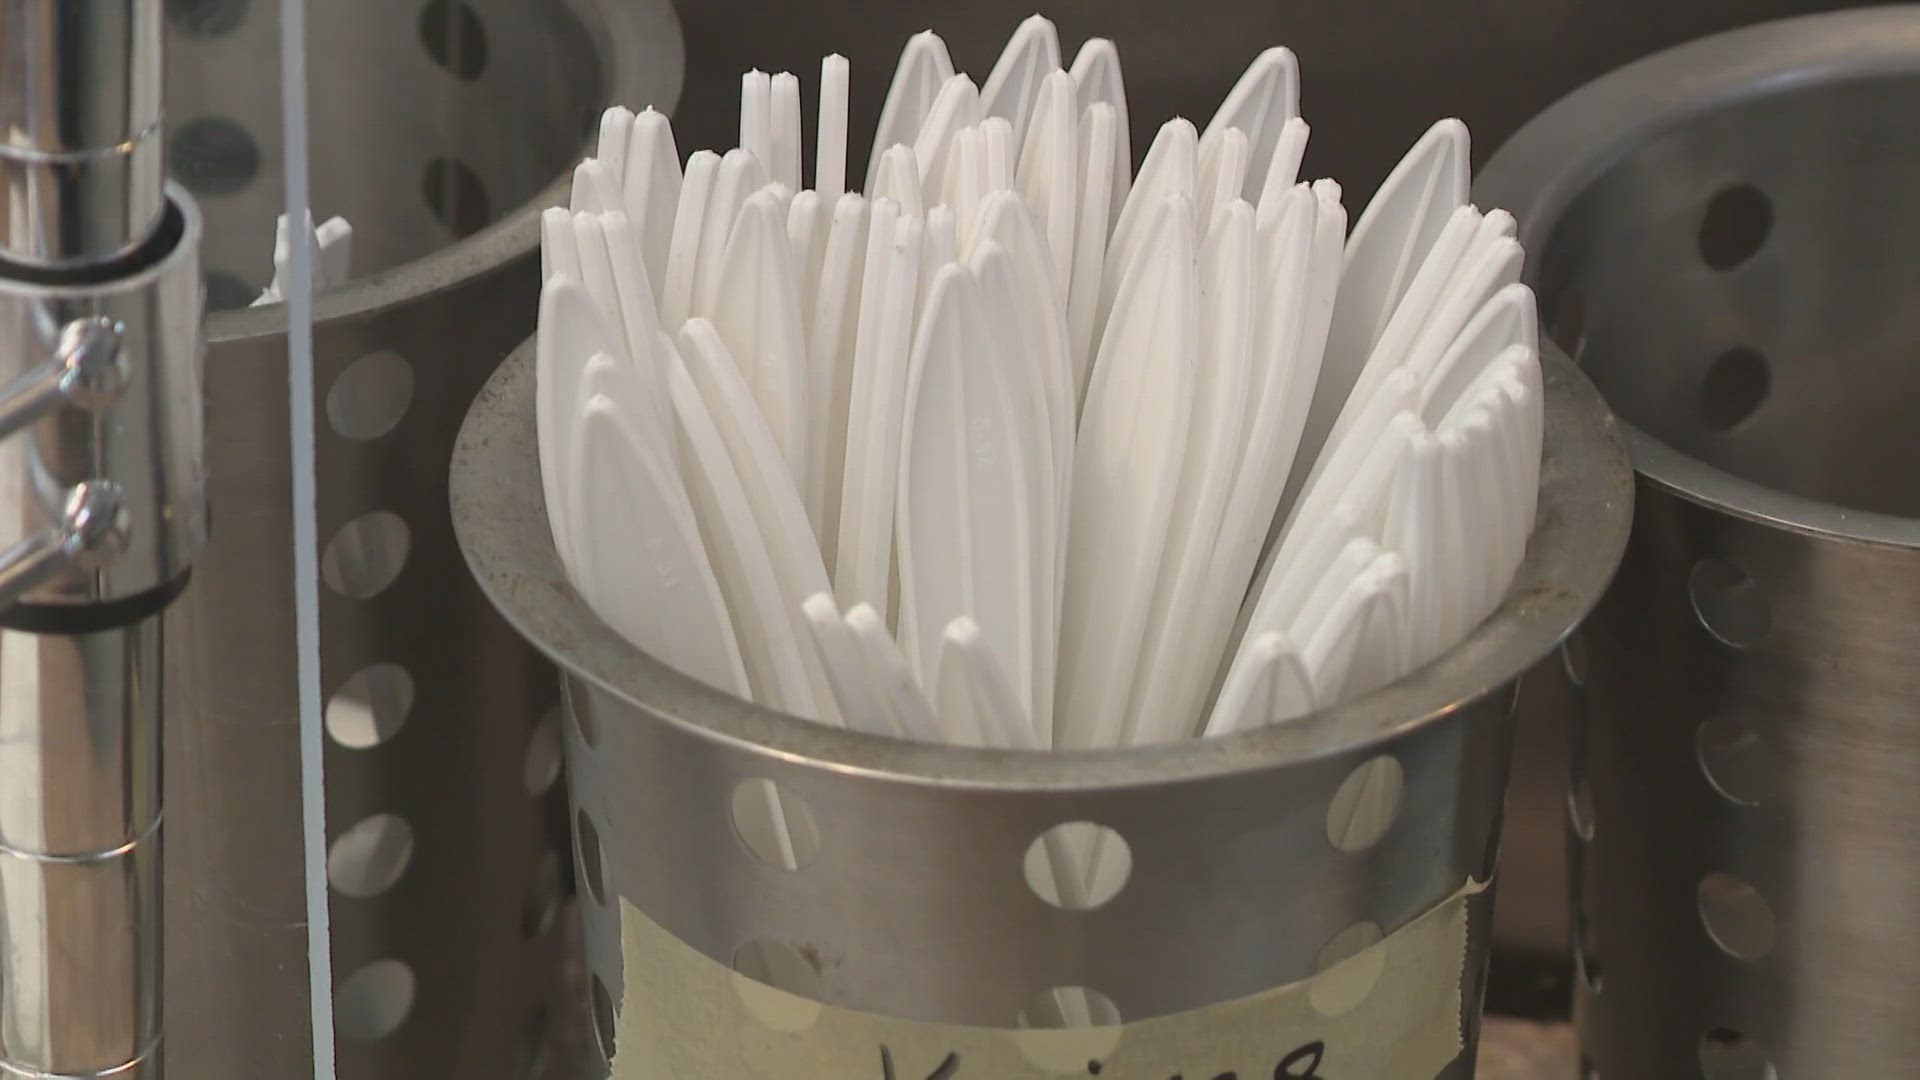 The new ordinance will go into effect in May 2025, banning the use of single-use plastic utensils, straws, and stirring sticks.